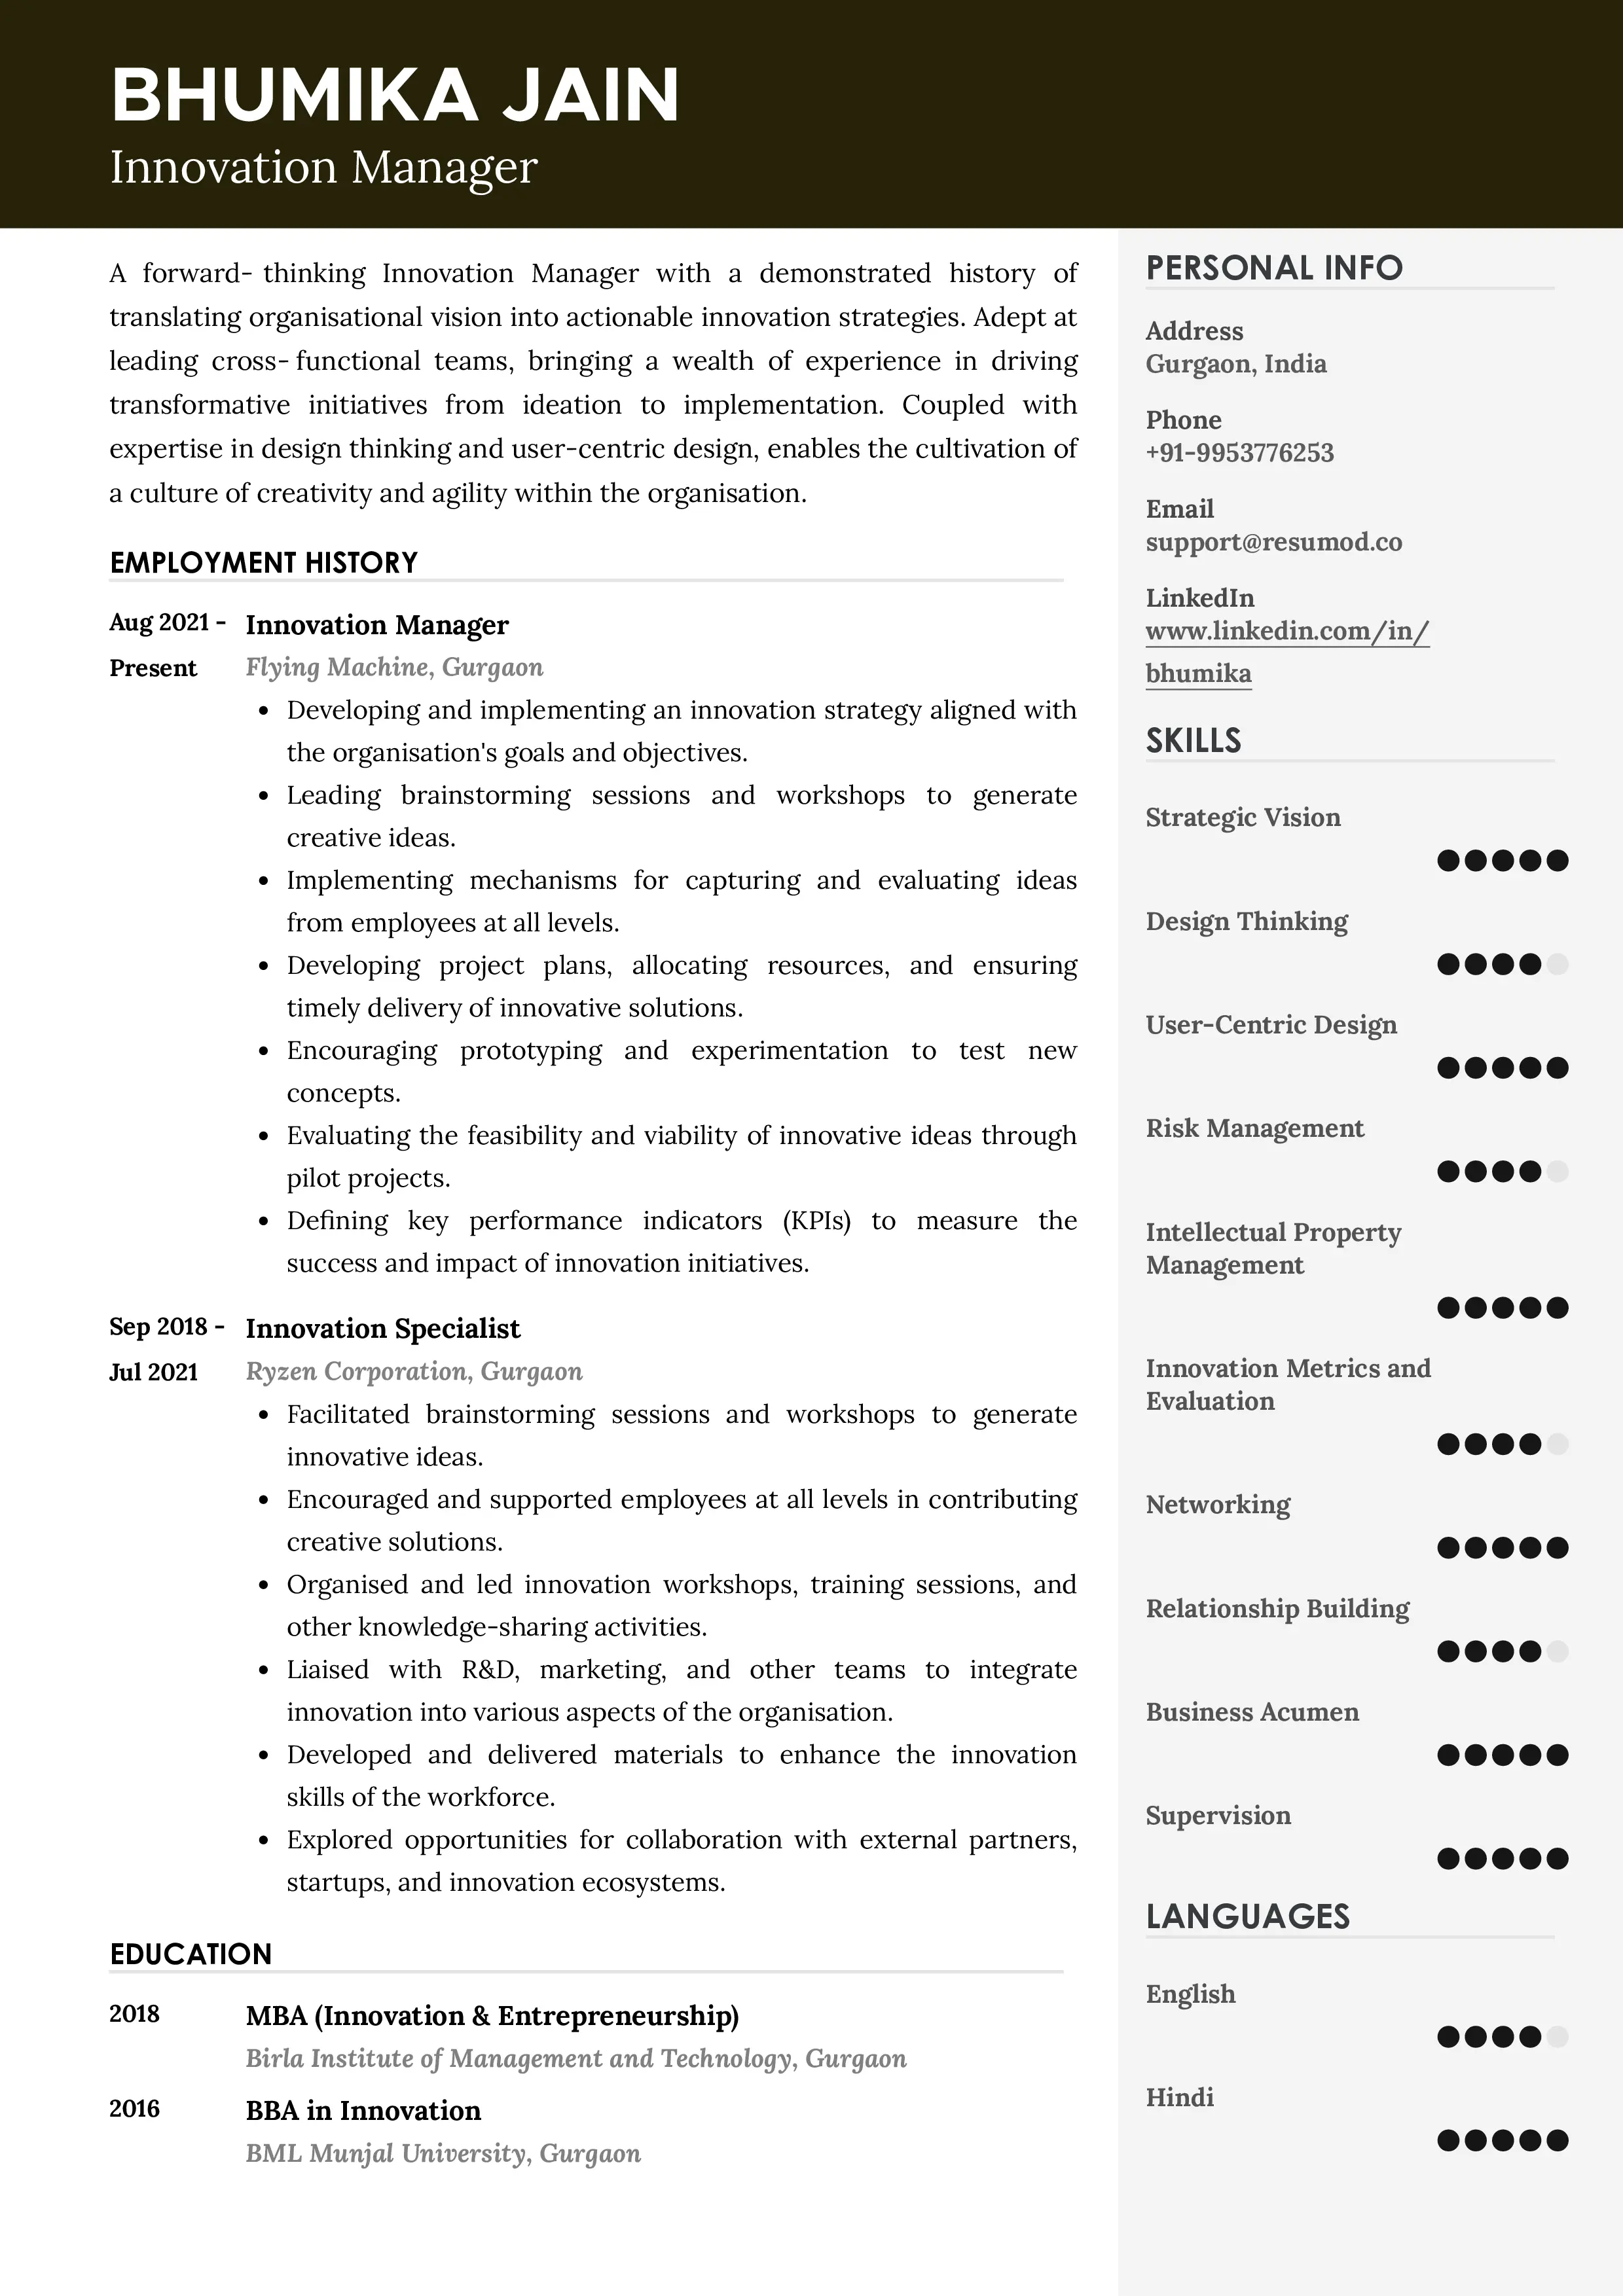 Sample Resume of Innovation Manager | Free Resume Templates & Samples on Resumod.co